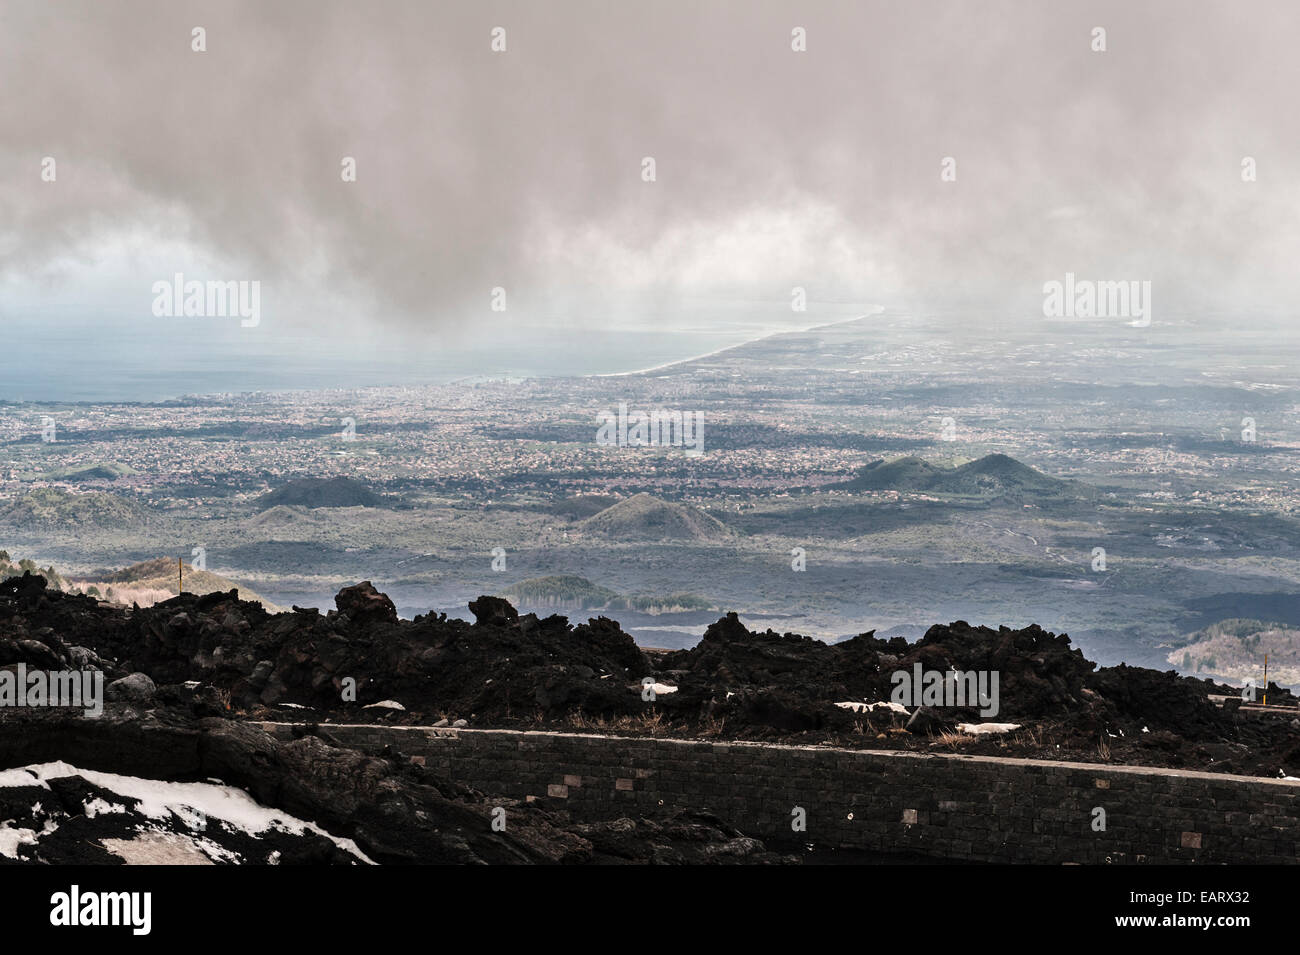 Sicily, Italy. The view from Mount Etna over the coast and the city of Catania Stock Photo